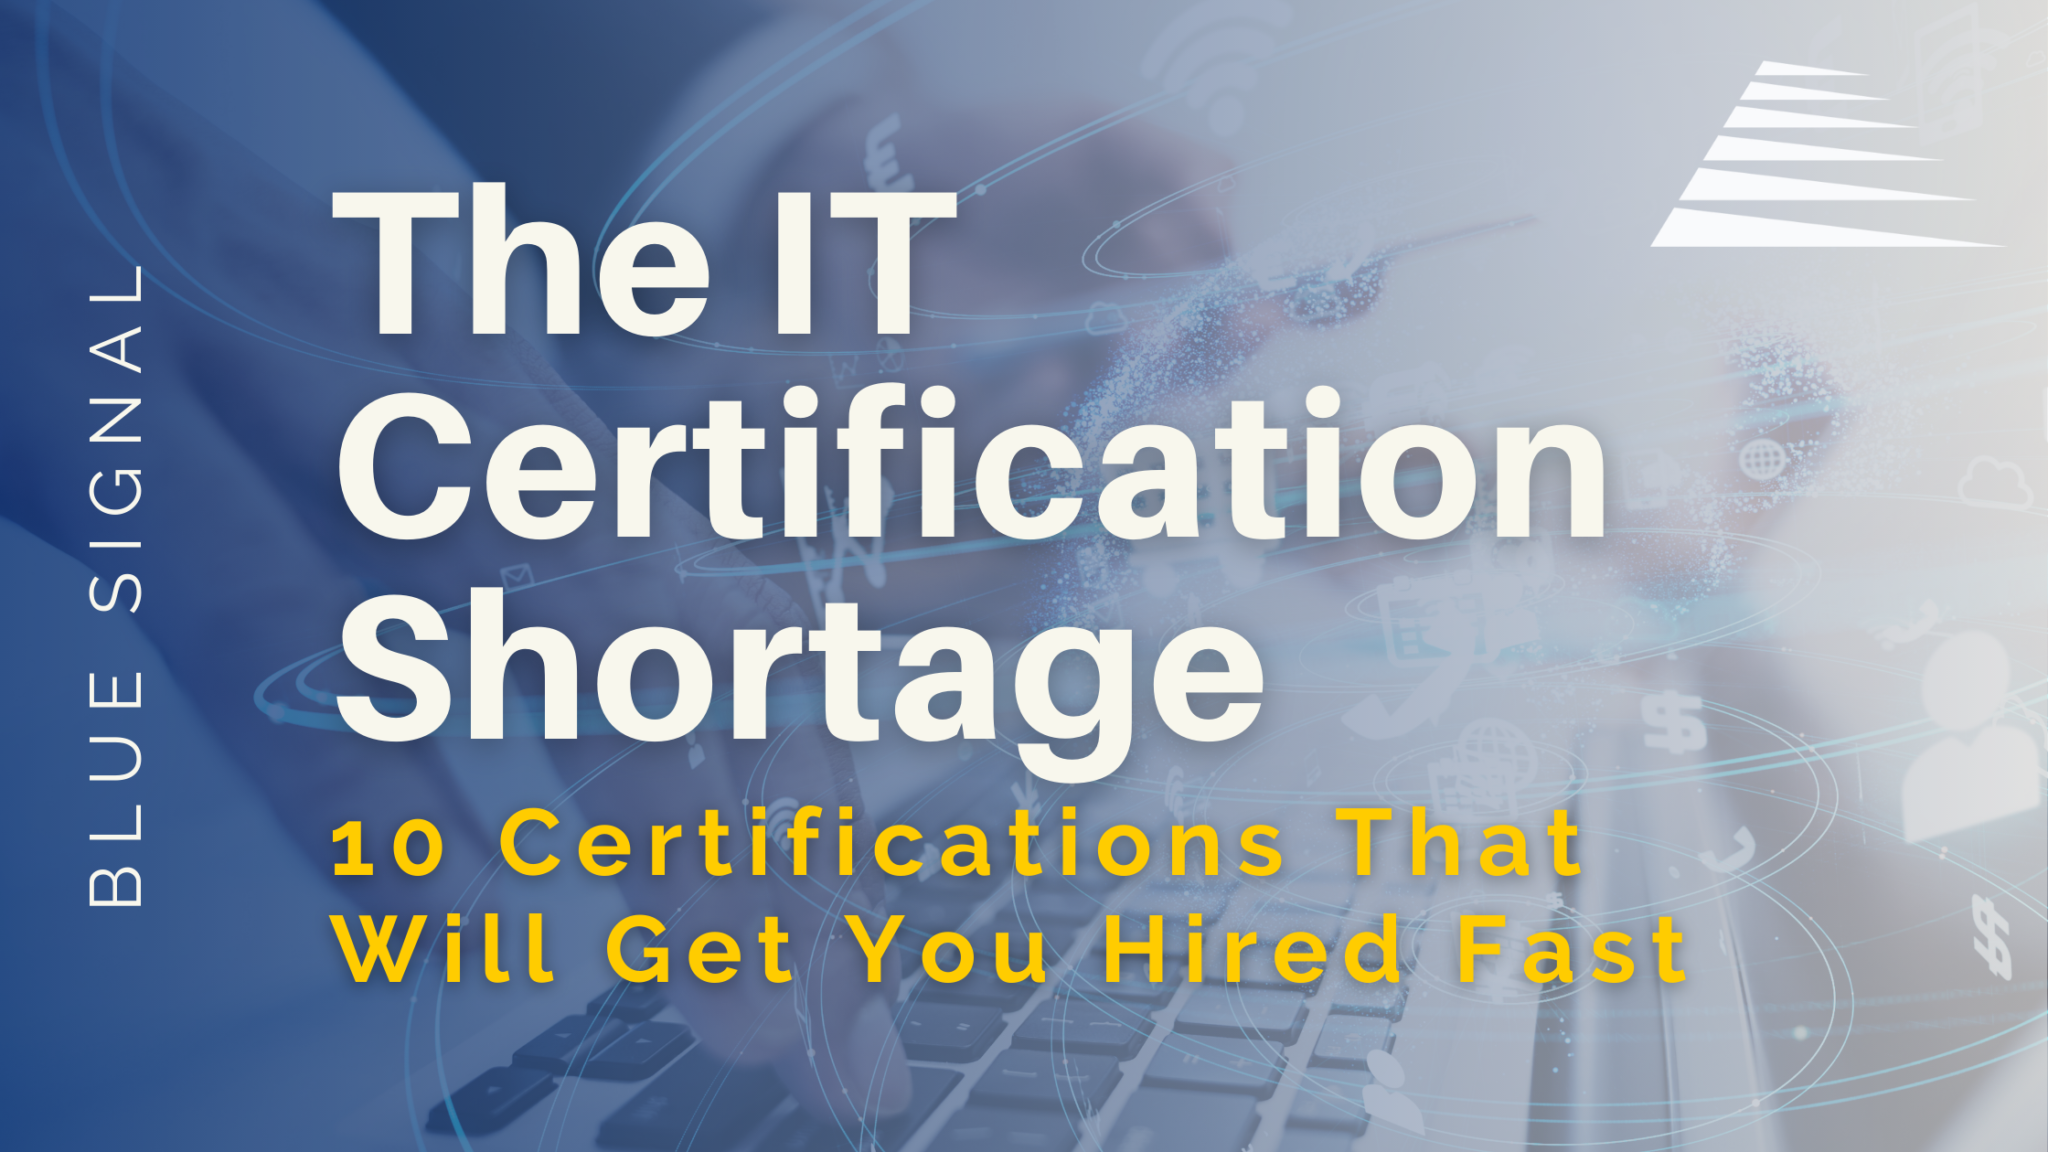 The IT Certification Shortage Blog Cover